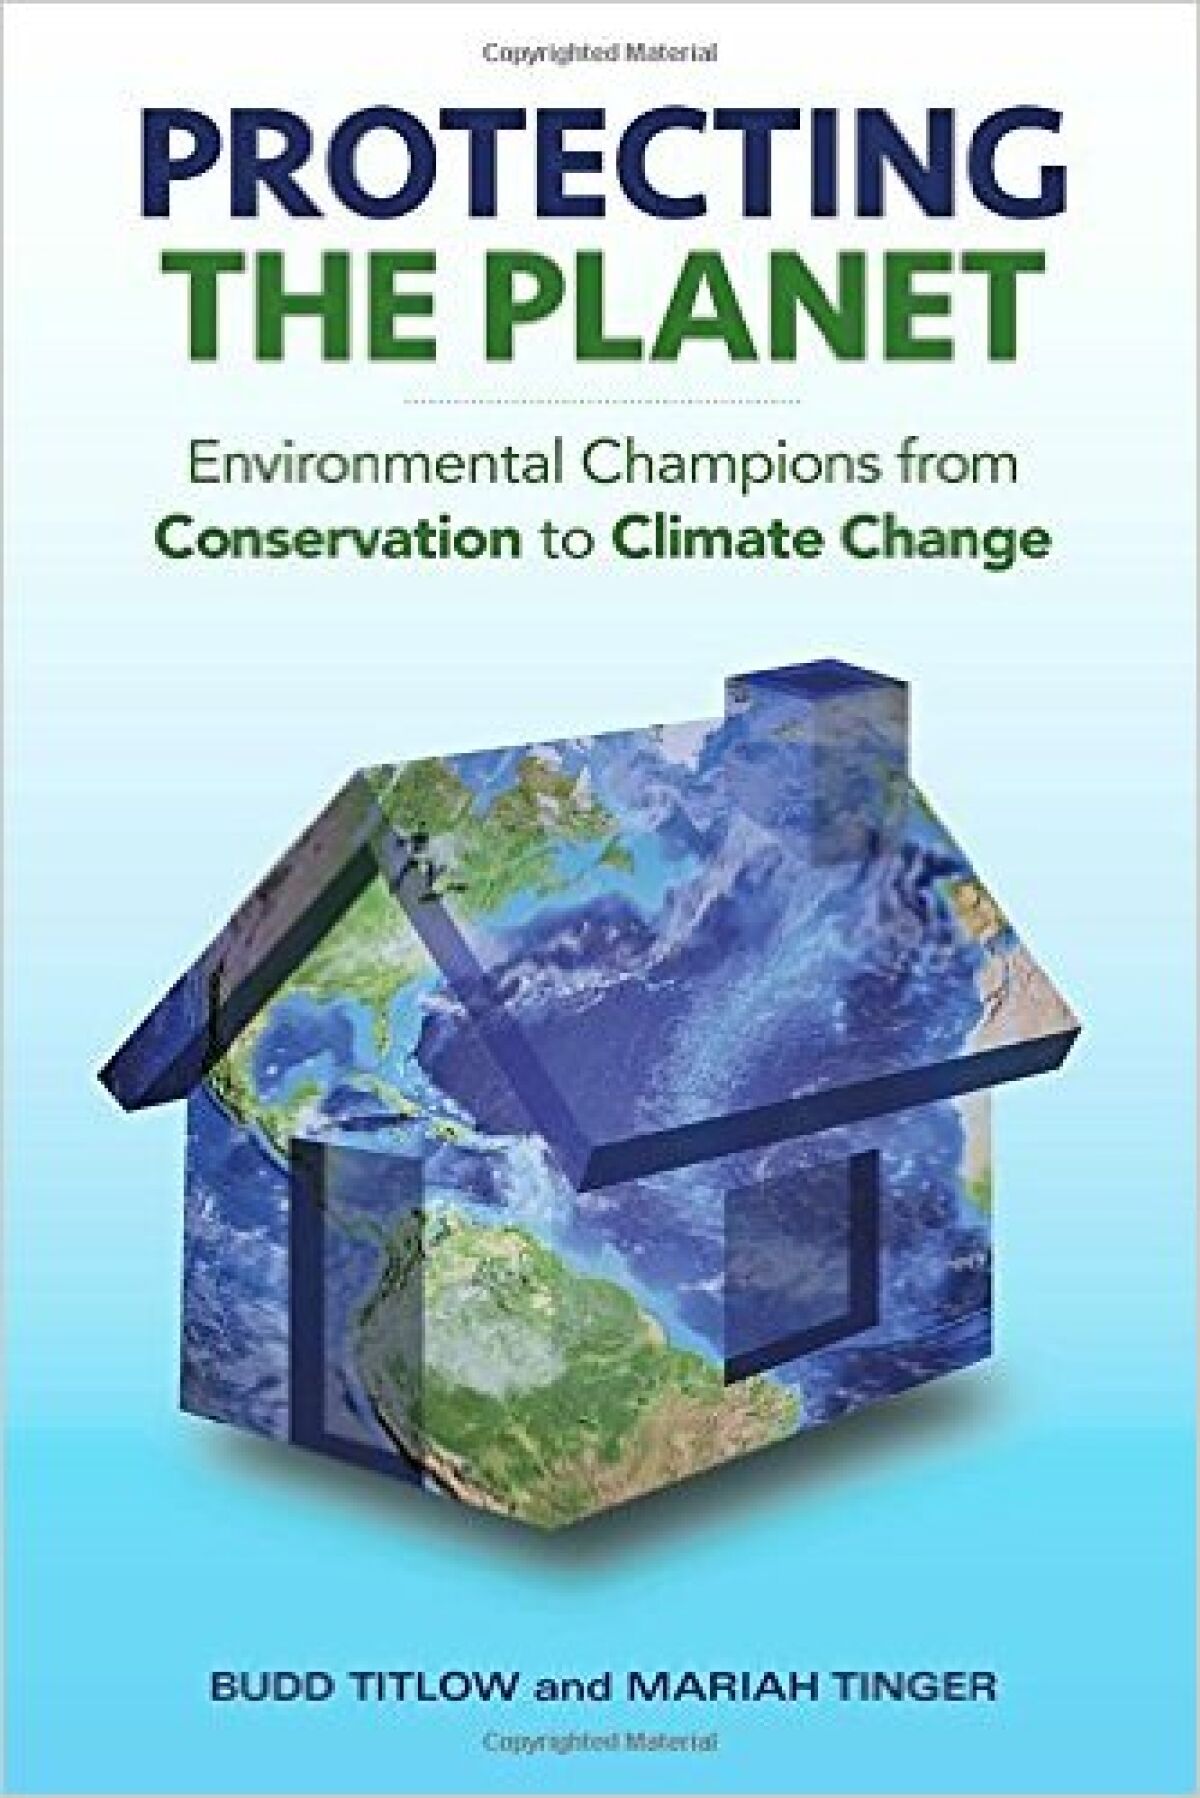 The book cover of "Protecting the Planet: Environmental Champions from Conservation to Climate Change."